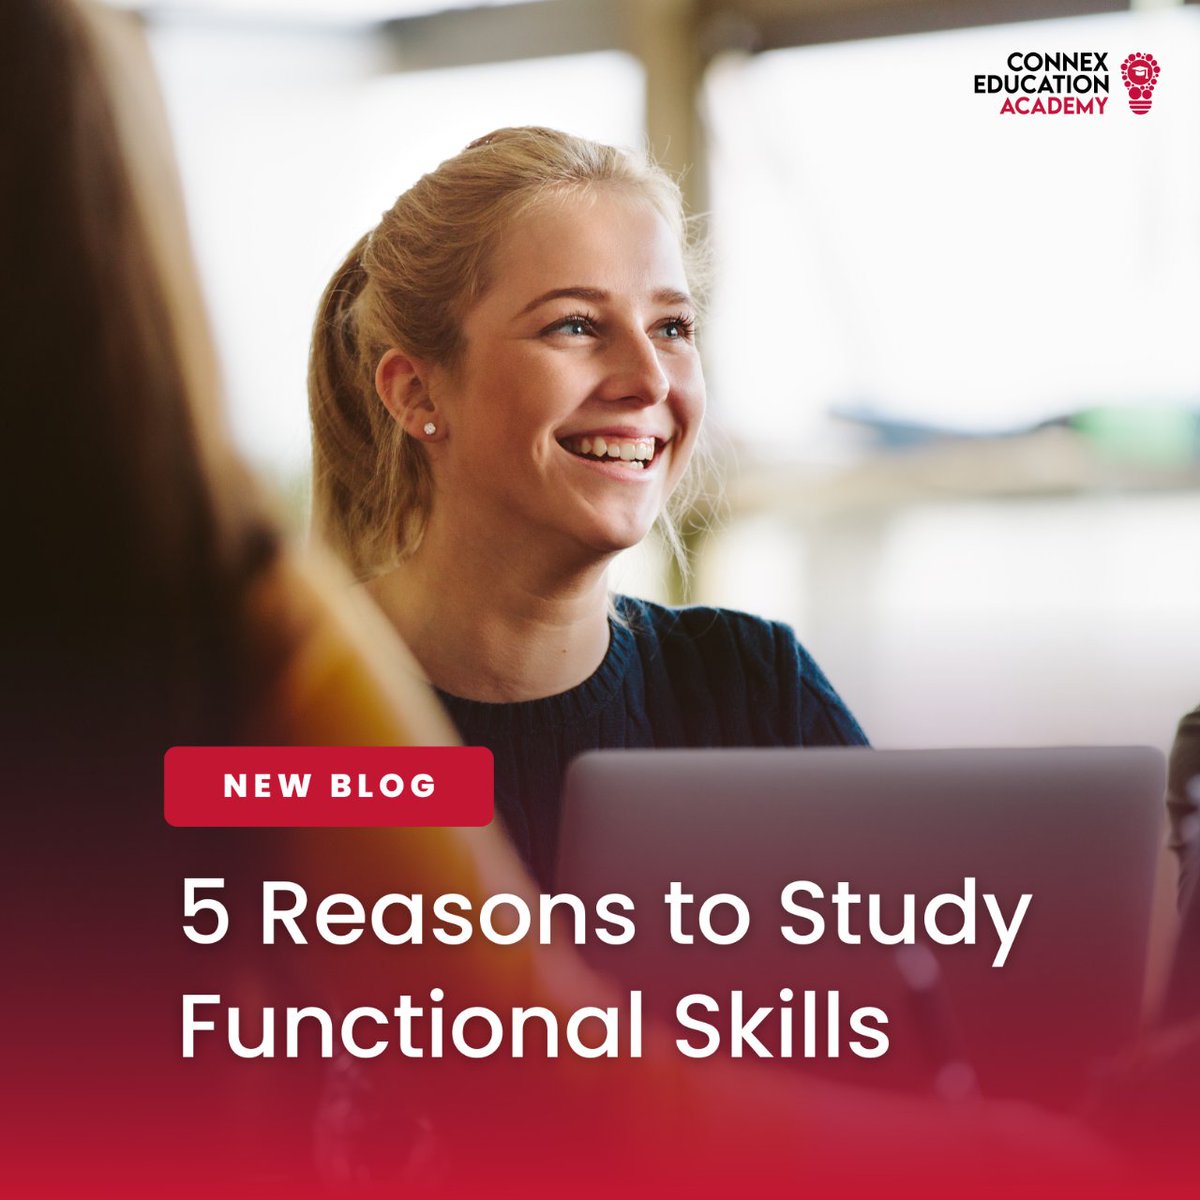 Functional Skills like English & Maths enhance employability, job performance, & career growth, making candidates more competitive in the job market.📝💯

Discover the top 5 reasons to study Functional Skills in our new blog 👉 shorturl.at/imrBW

#NewBlog #FunctionalSkills